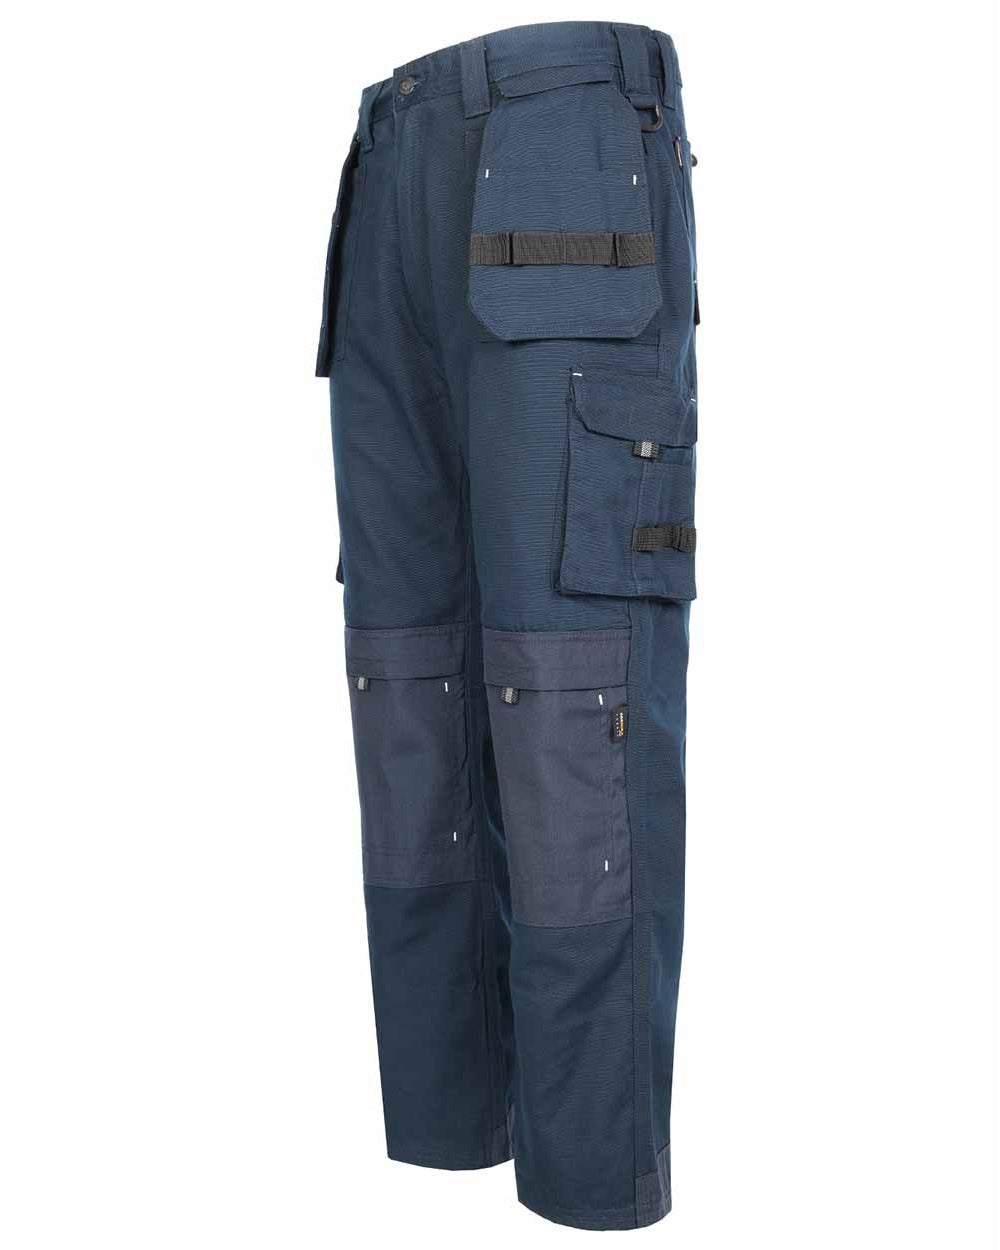 Navy Blue Coloured TuffStuff Extreme Work Trousers On A White Background 